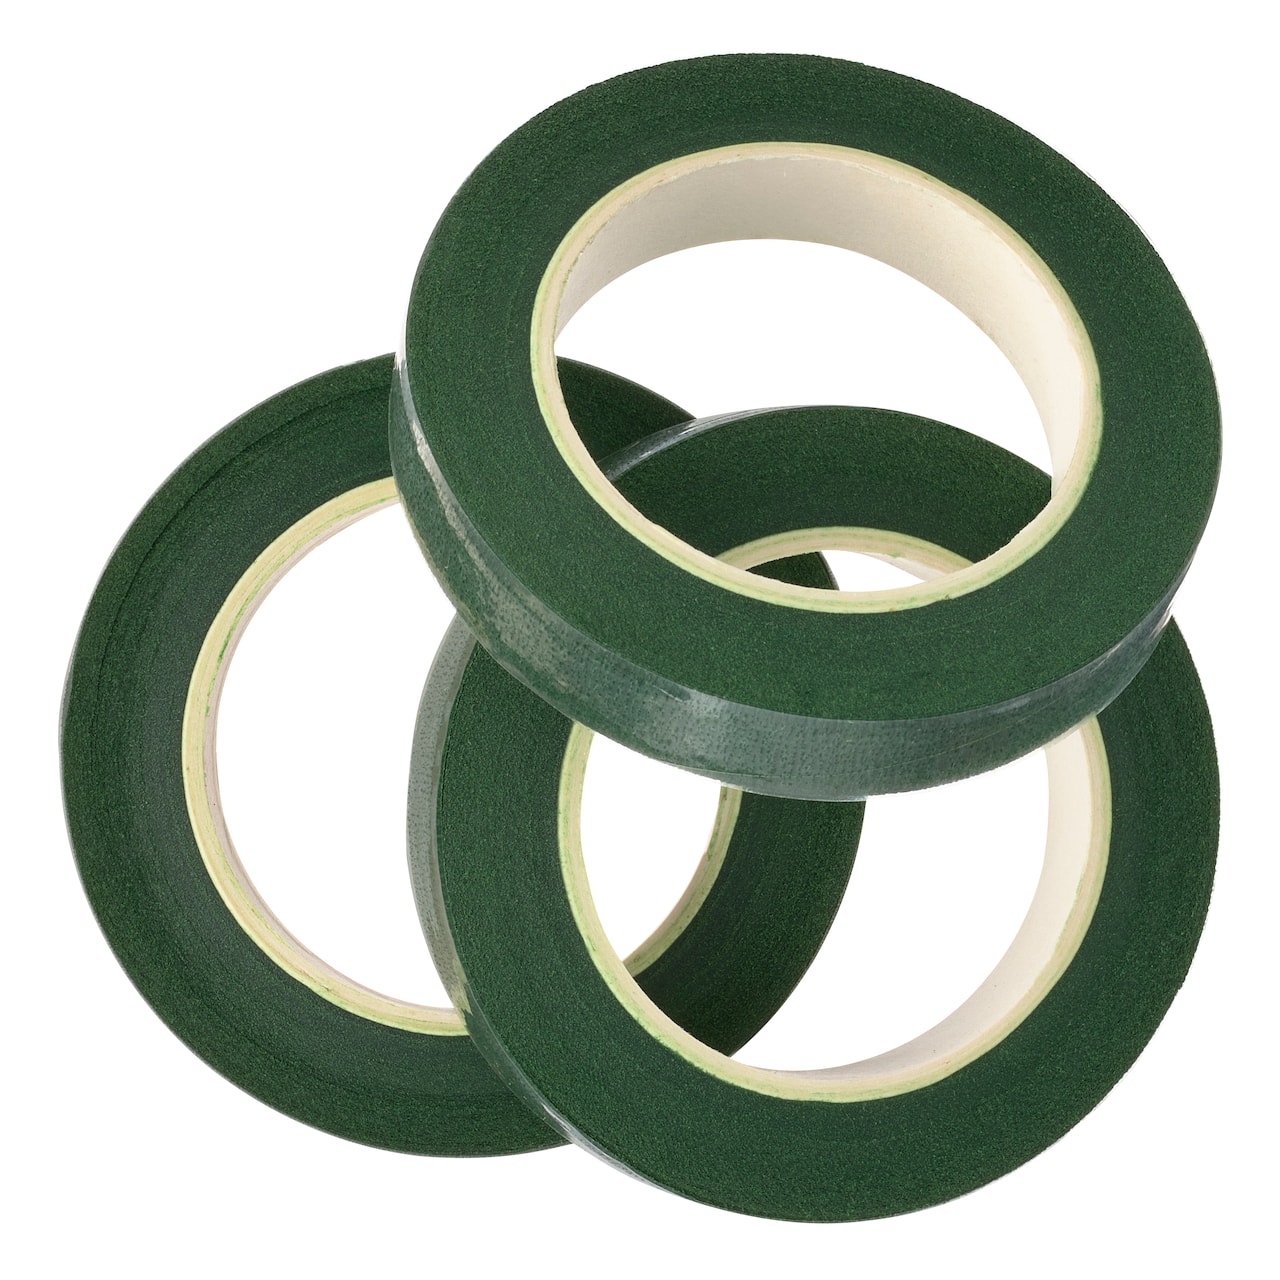 12 Packs: 3 Ct. (36 Total) Green Floral Tape Value Pack by Ashland